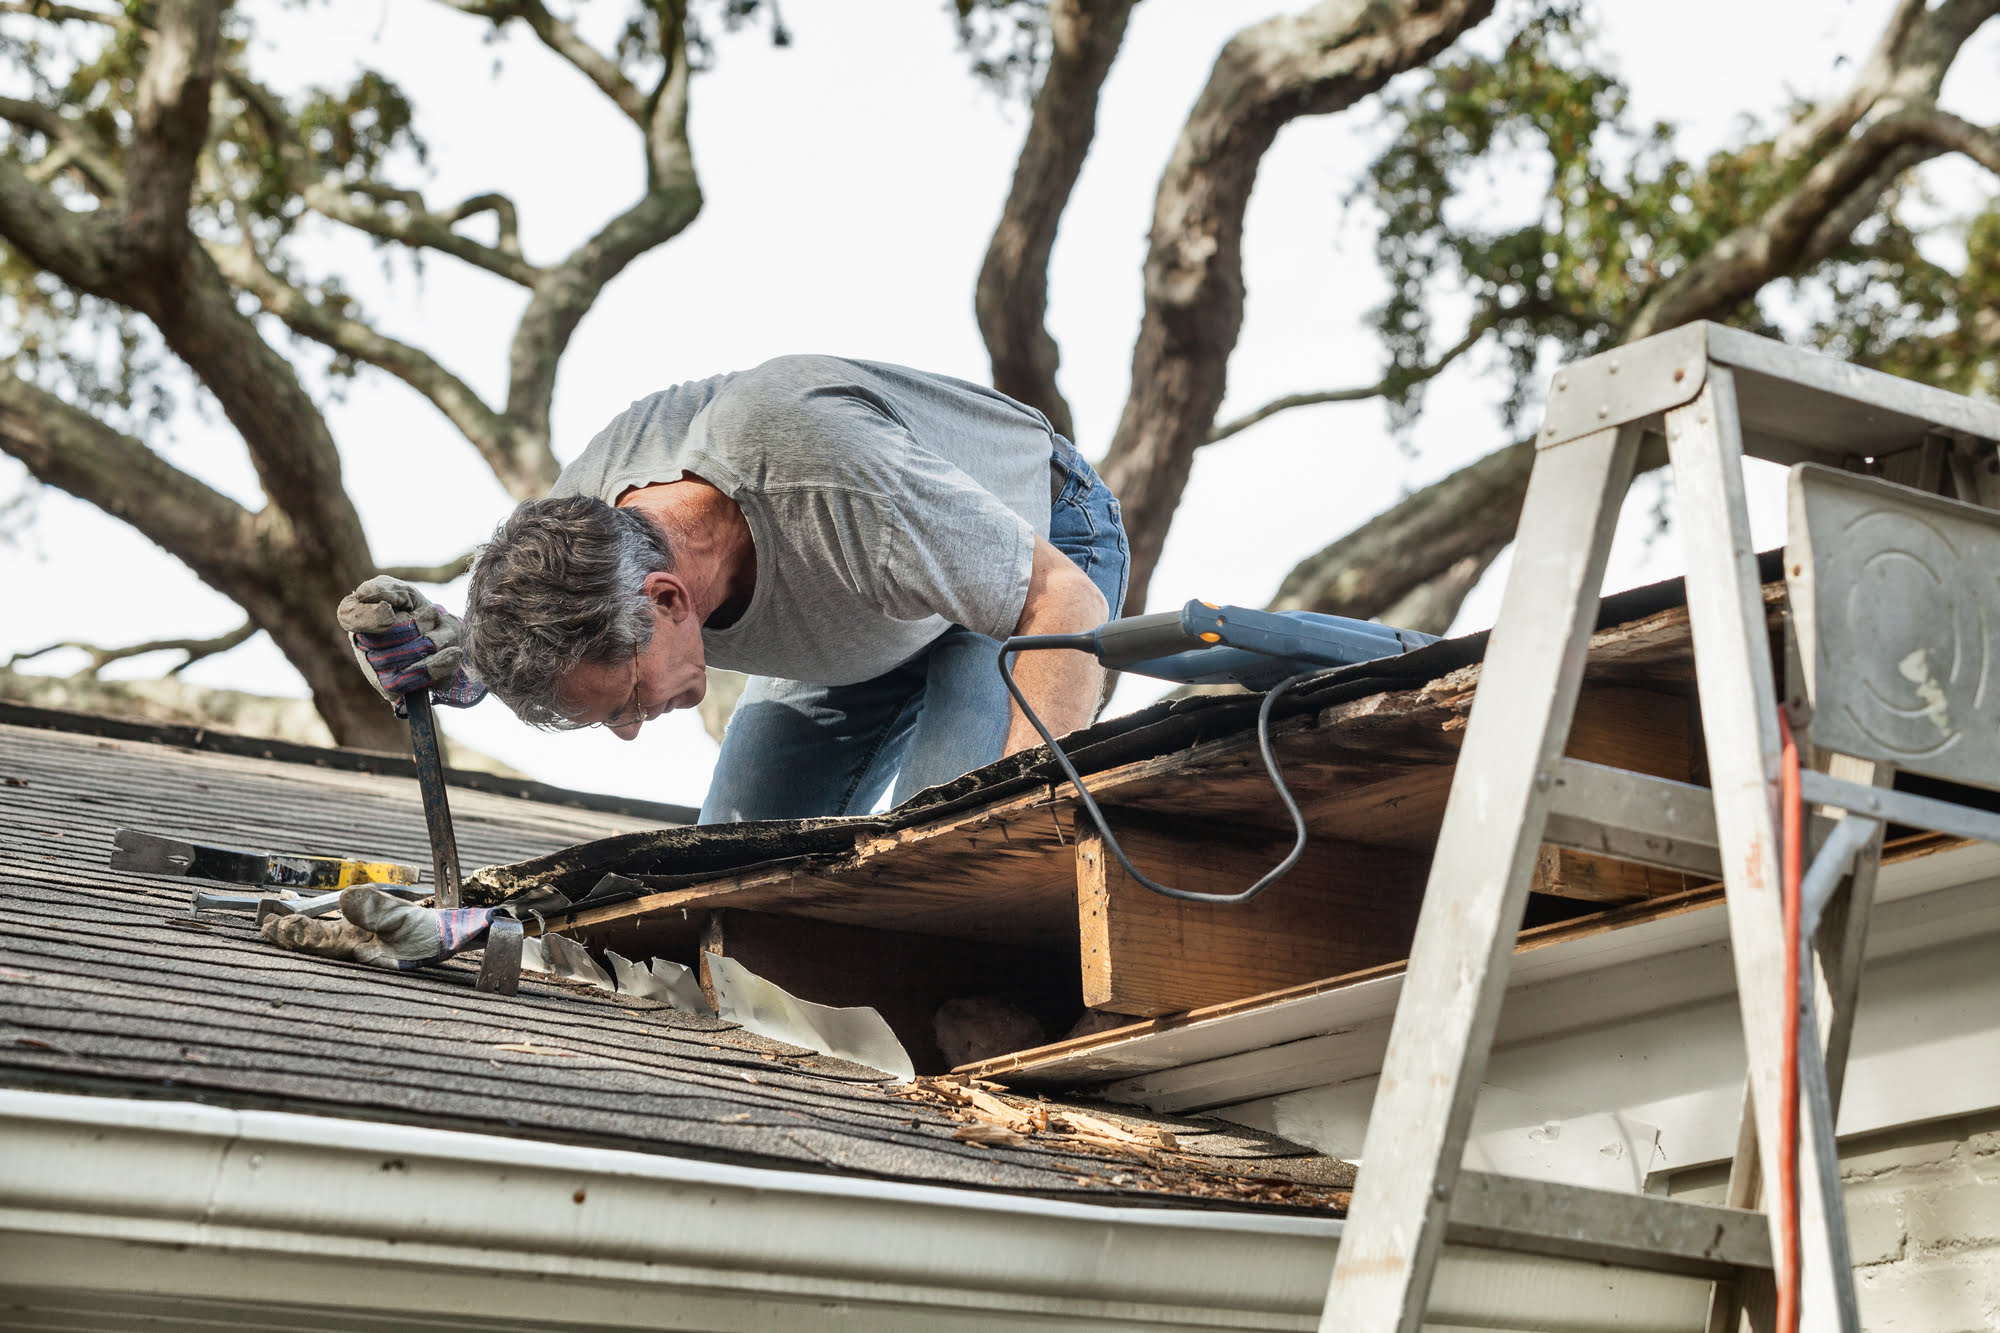 Looking to buy a new property but wondering if roof flashing is totally necessary? Read on to find out if damaged flashing is a deal breaker on your new home.